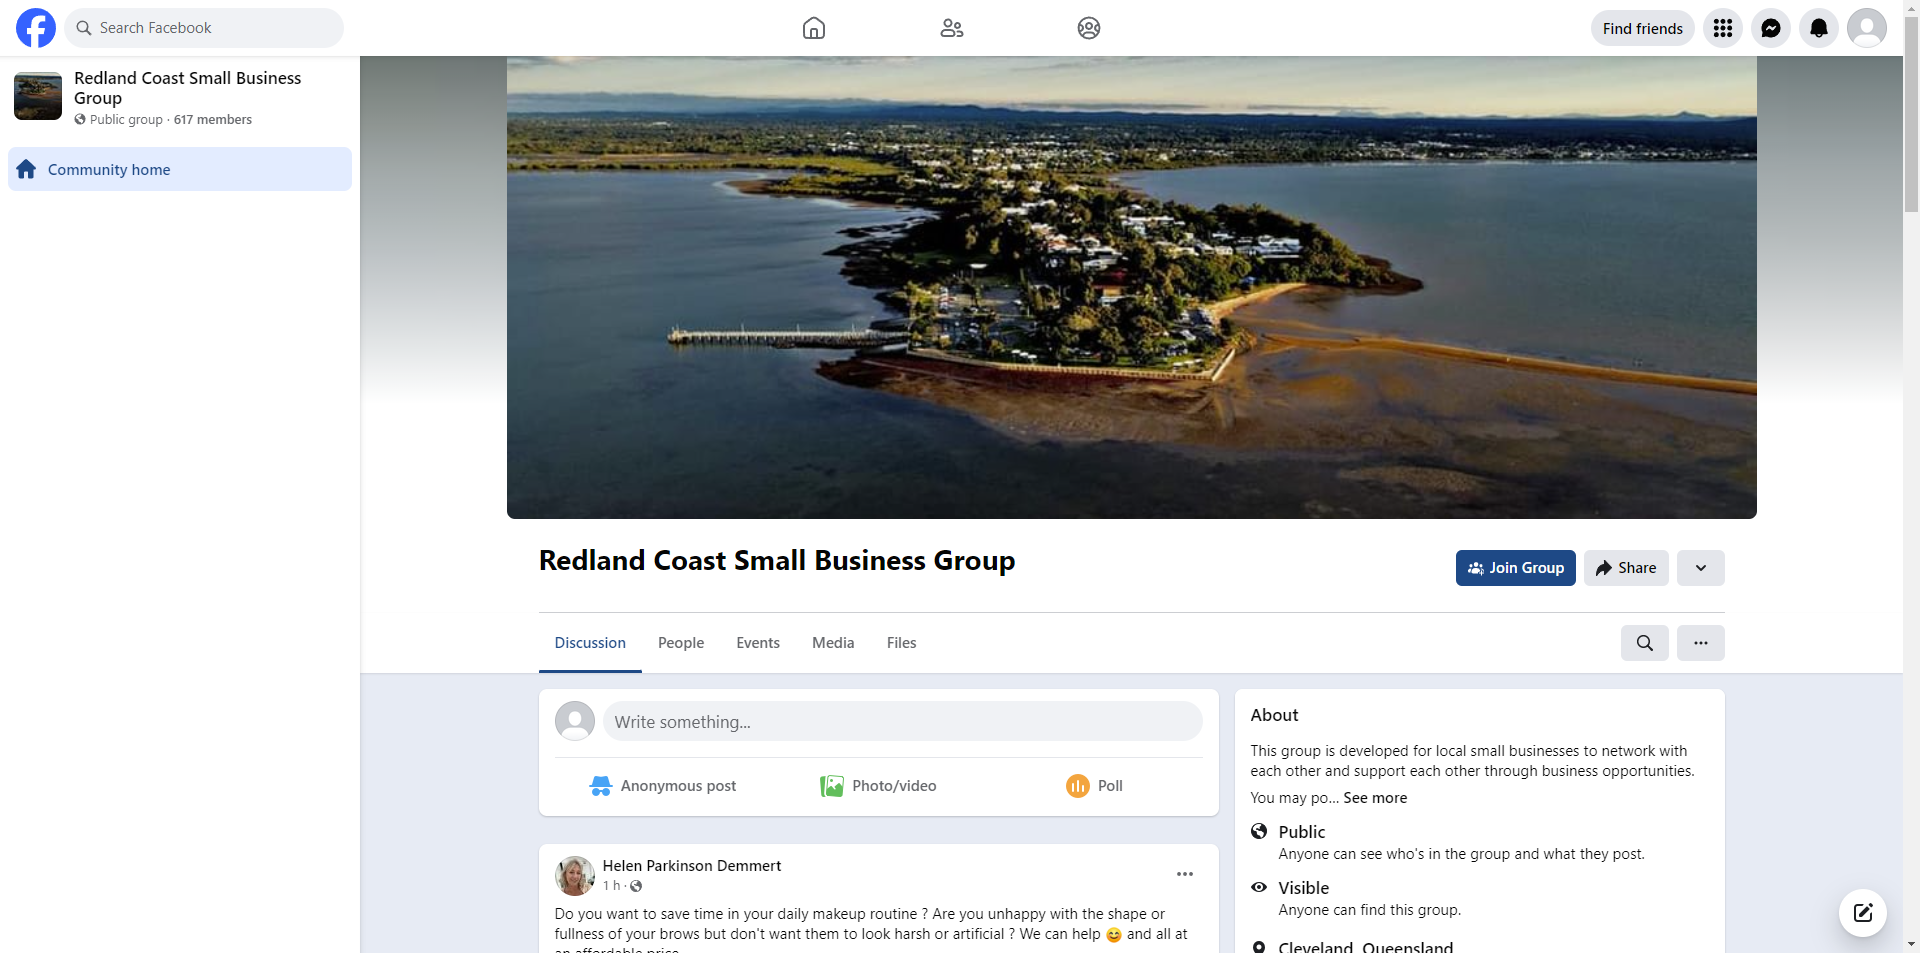 Redland City Small Business Group